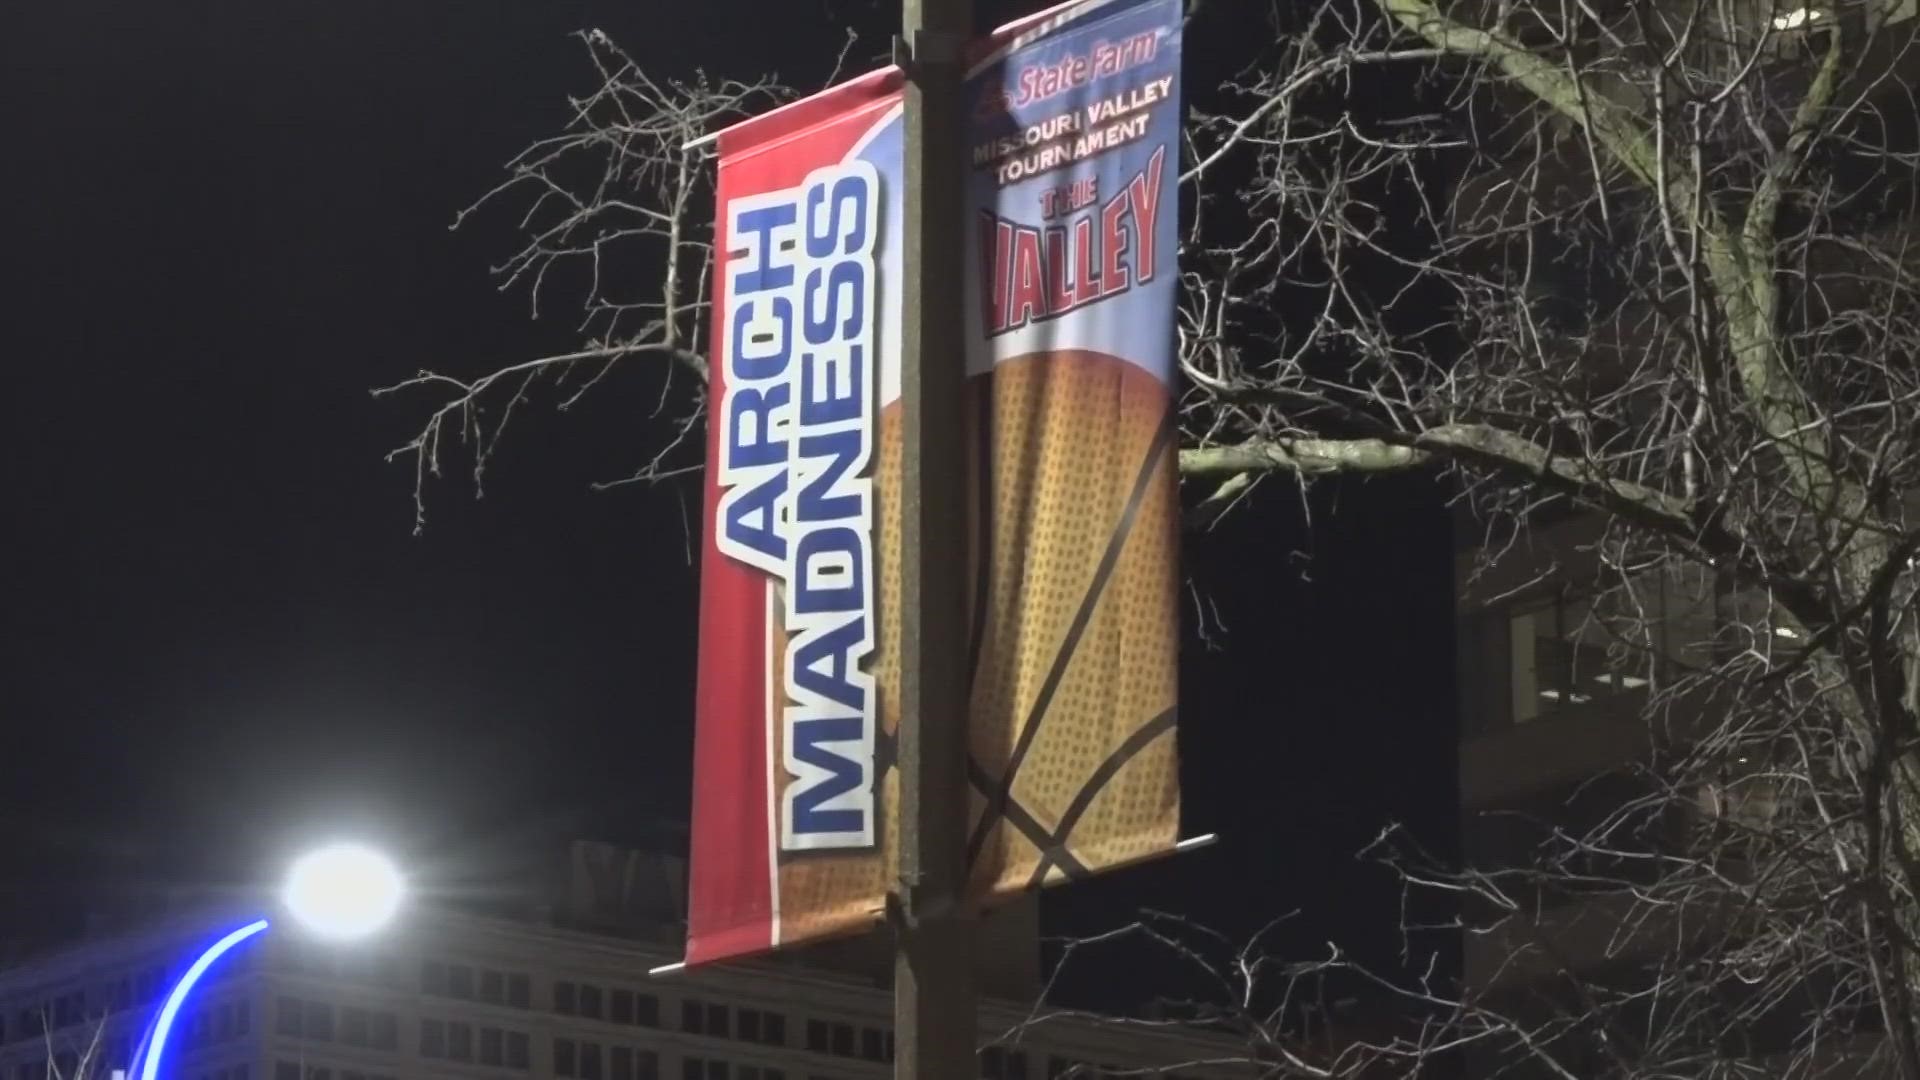 Arch Madness kicks off Thursday at Enterprise Center. Police will have extra patrols downtown, and remind people to lock car doors and keep valuables out of sight.